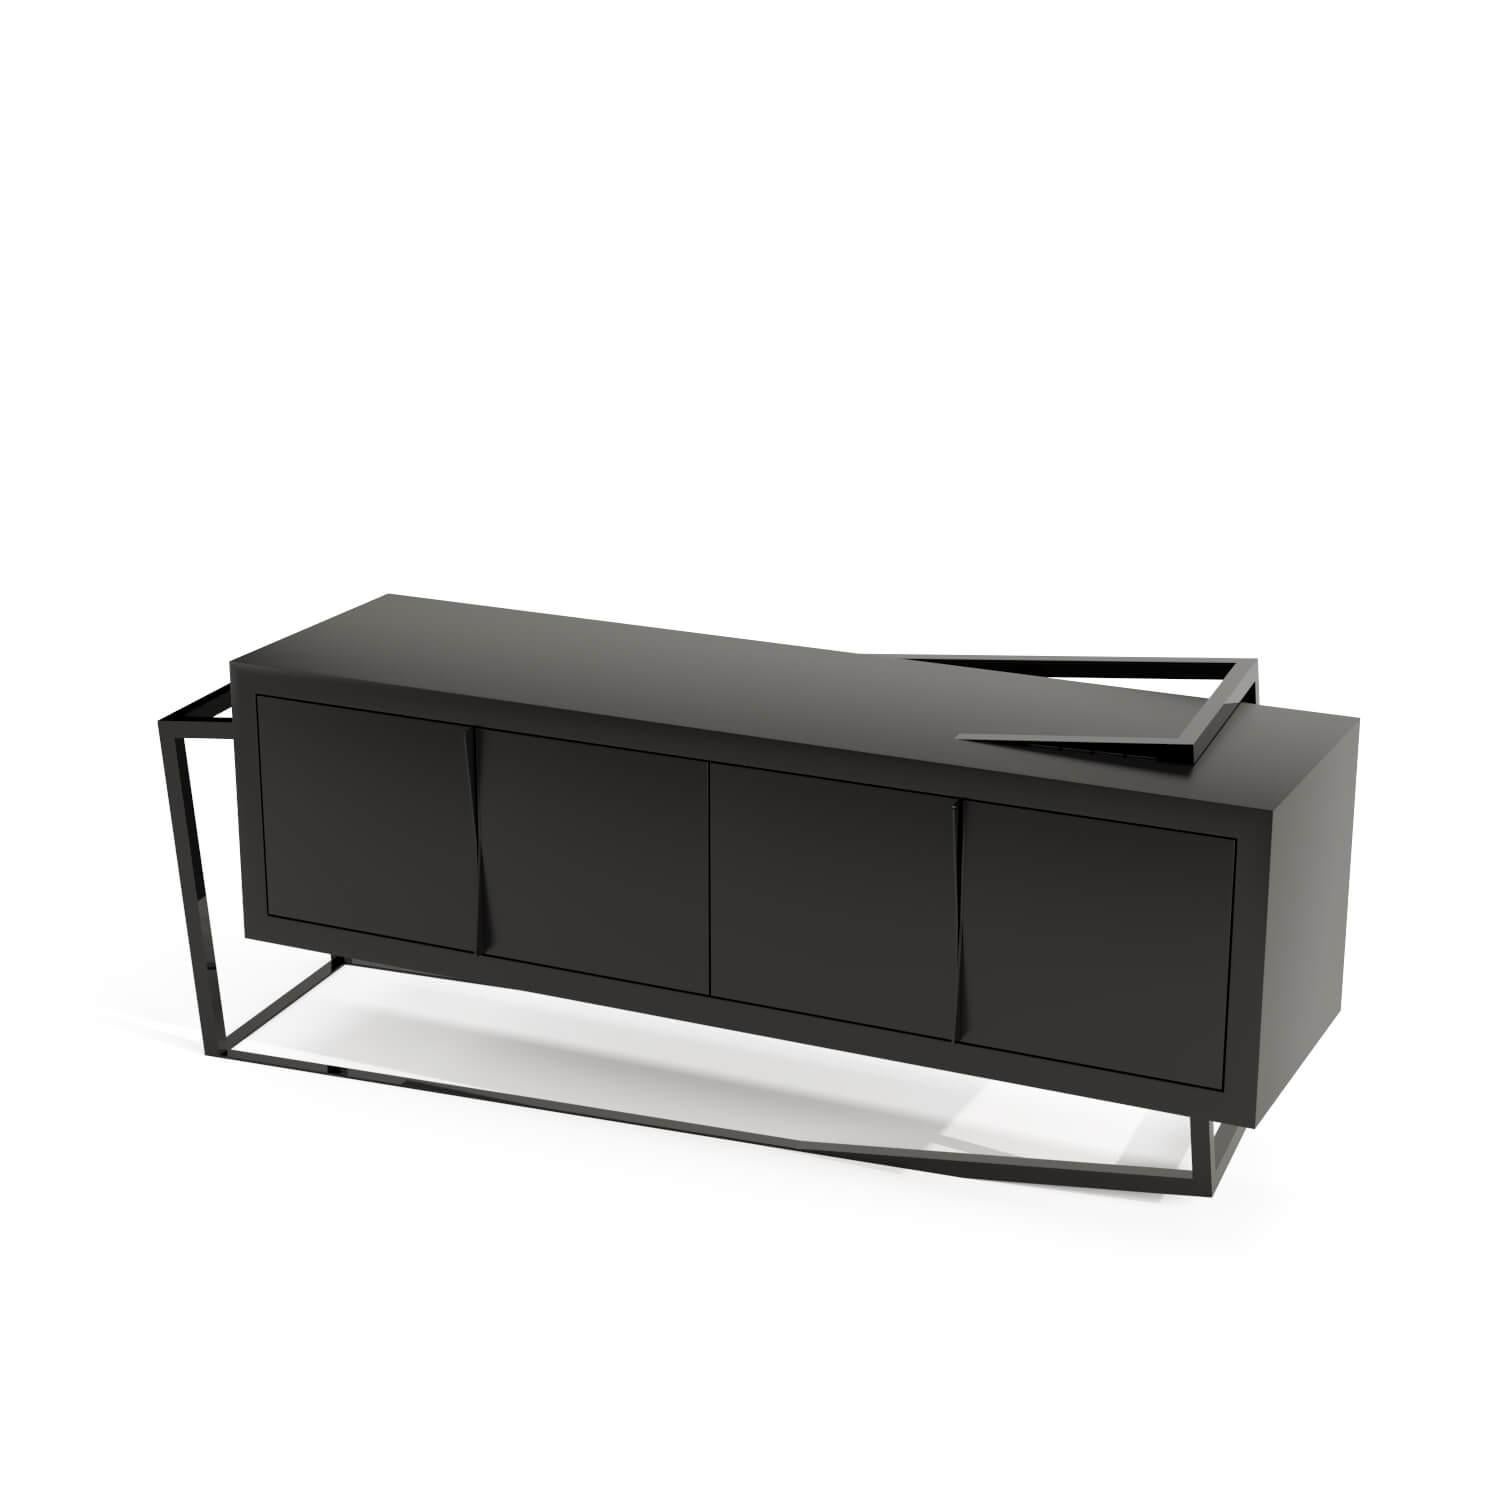 Portuguese Modern Accent Credenza Sideboard Black Oak Wood High-Gloss Black Lacquered Steel For Sale